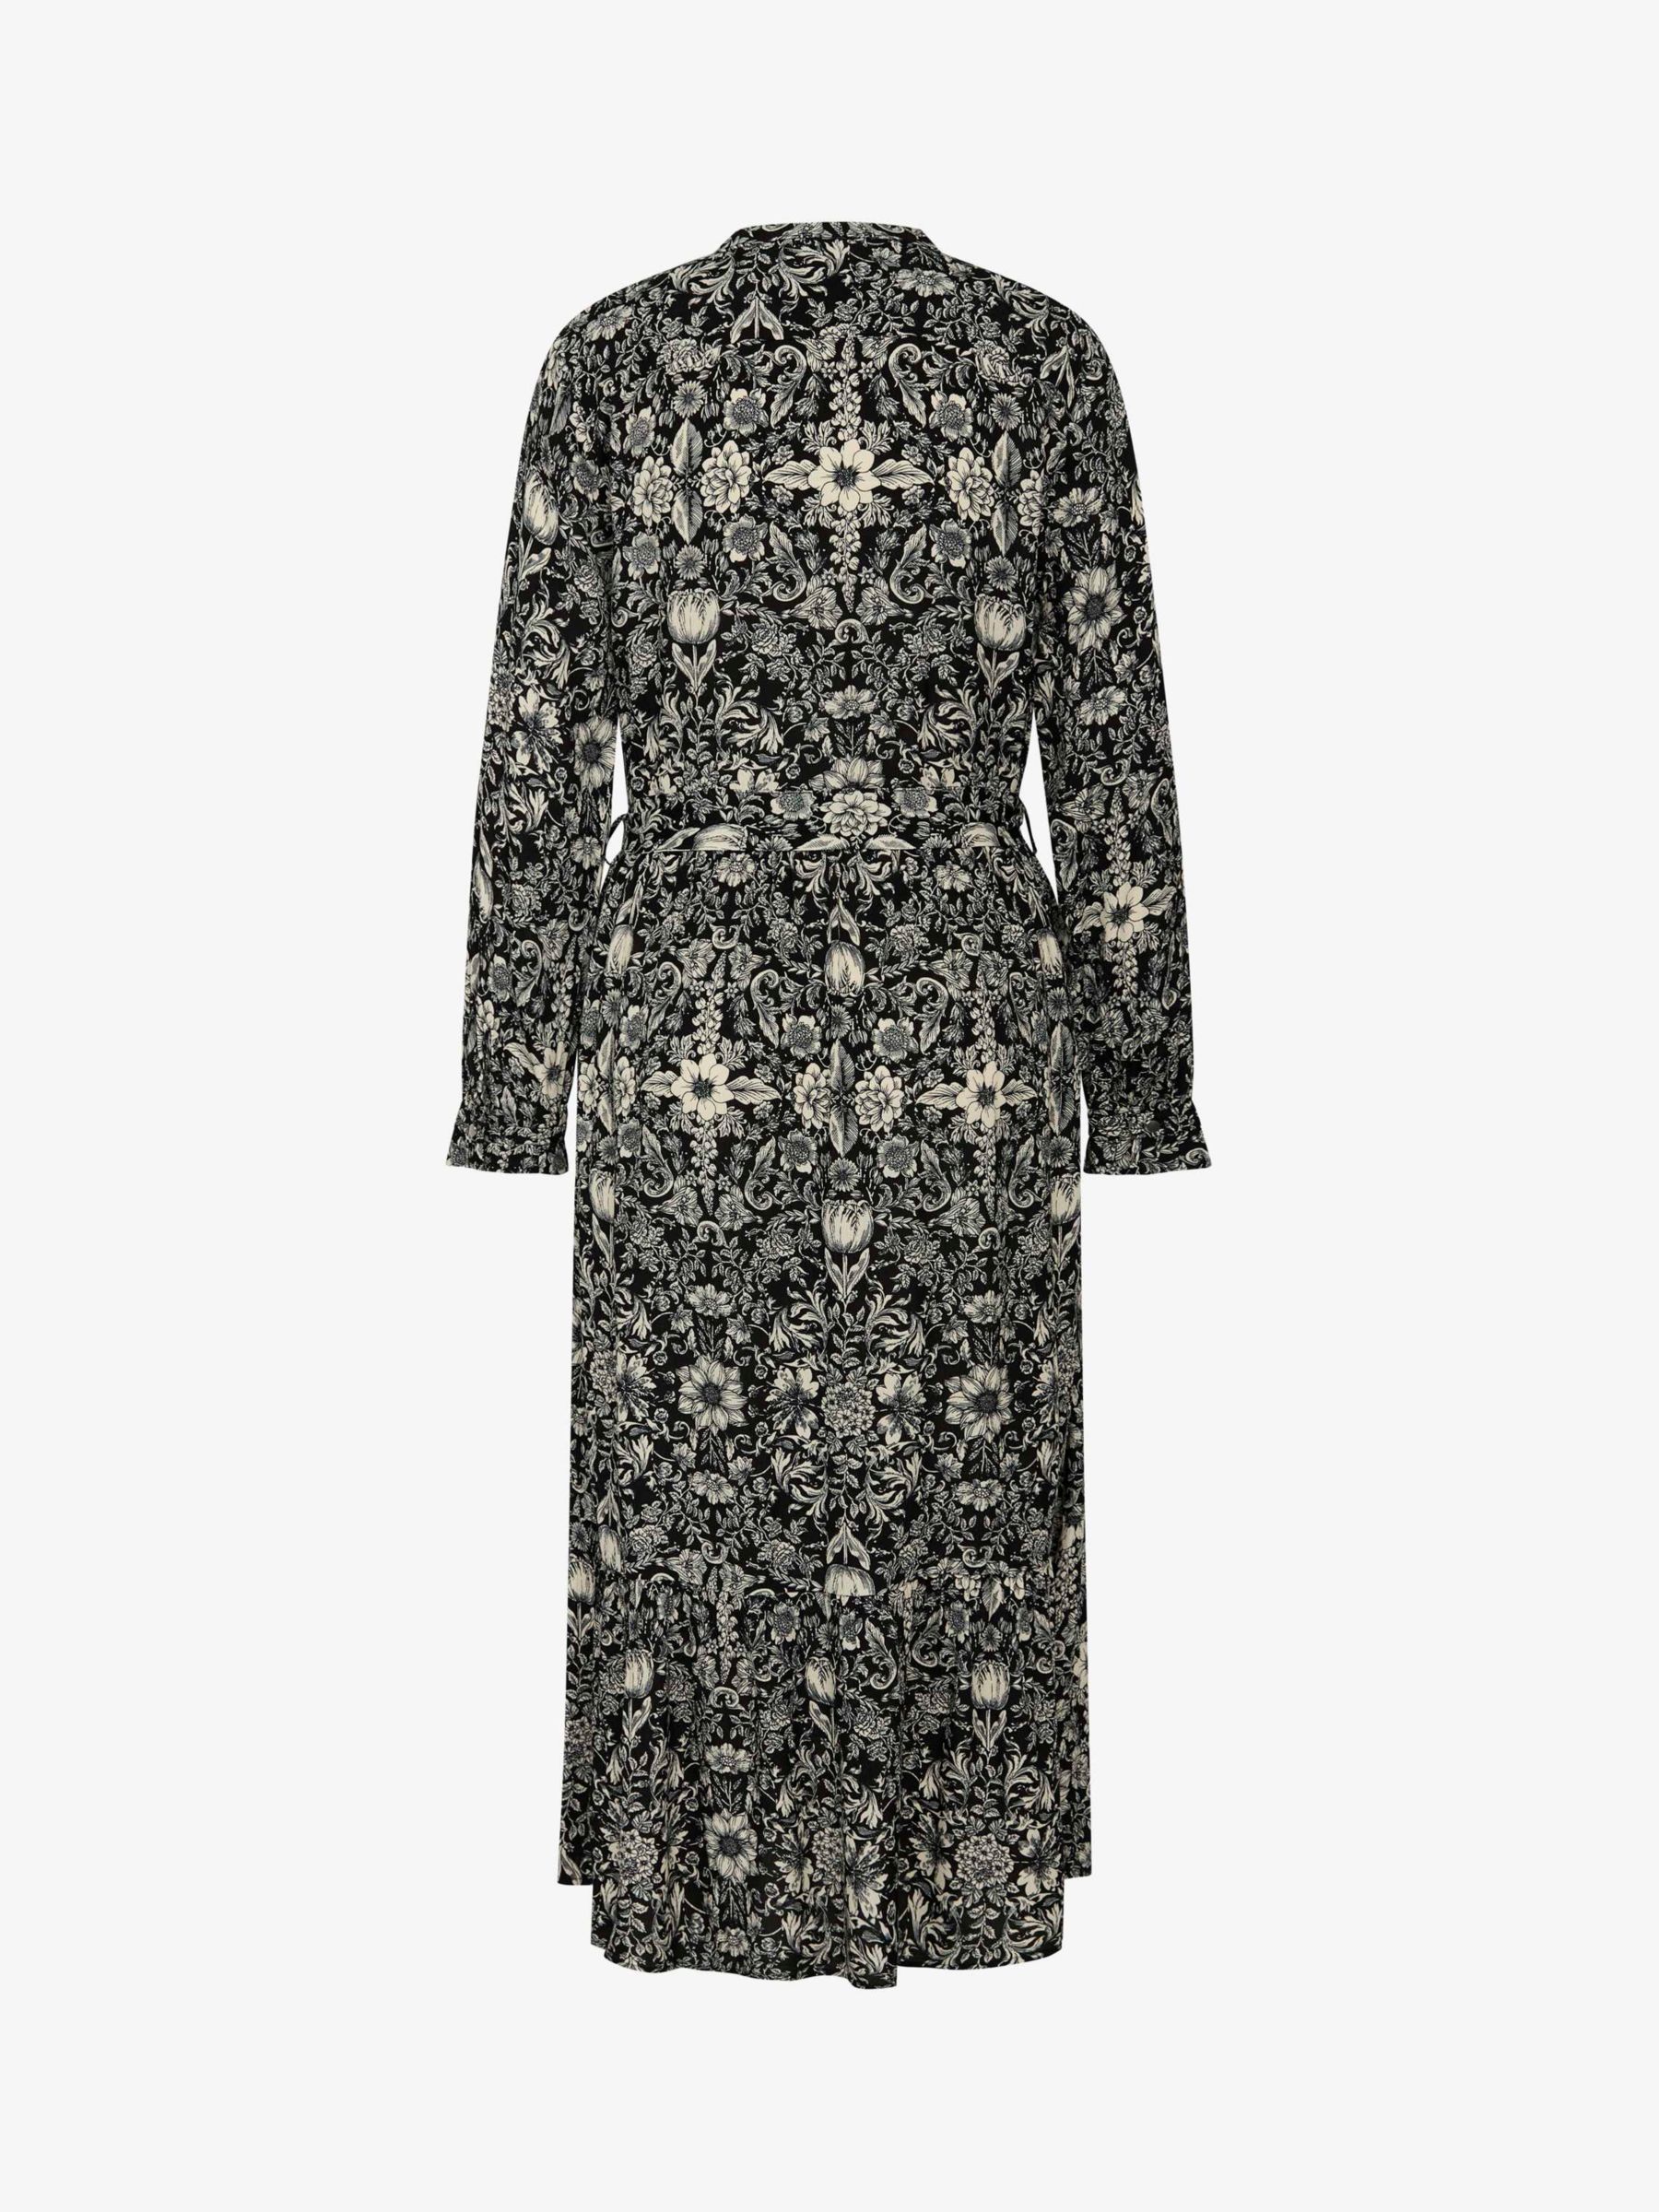 Buy Noa Noa Louise Floral Tapestry Print Tiered Maxi Dress, Black/Off White Online at johnlewis.com